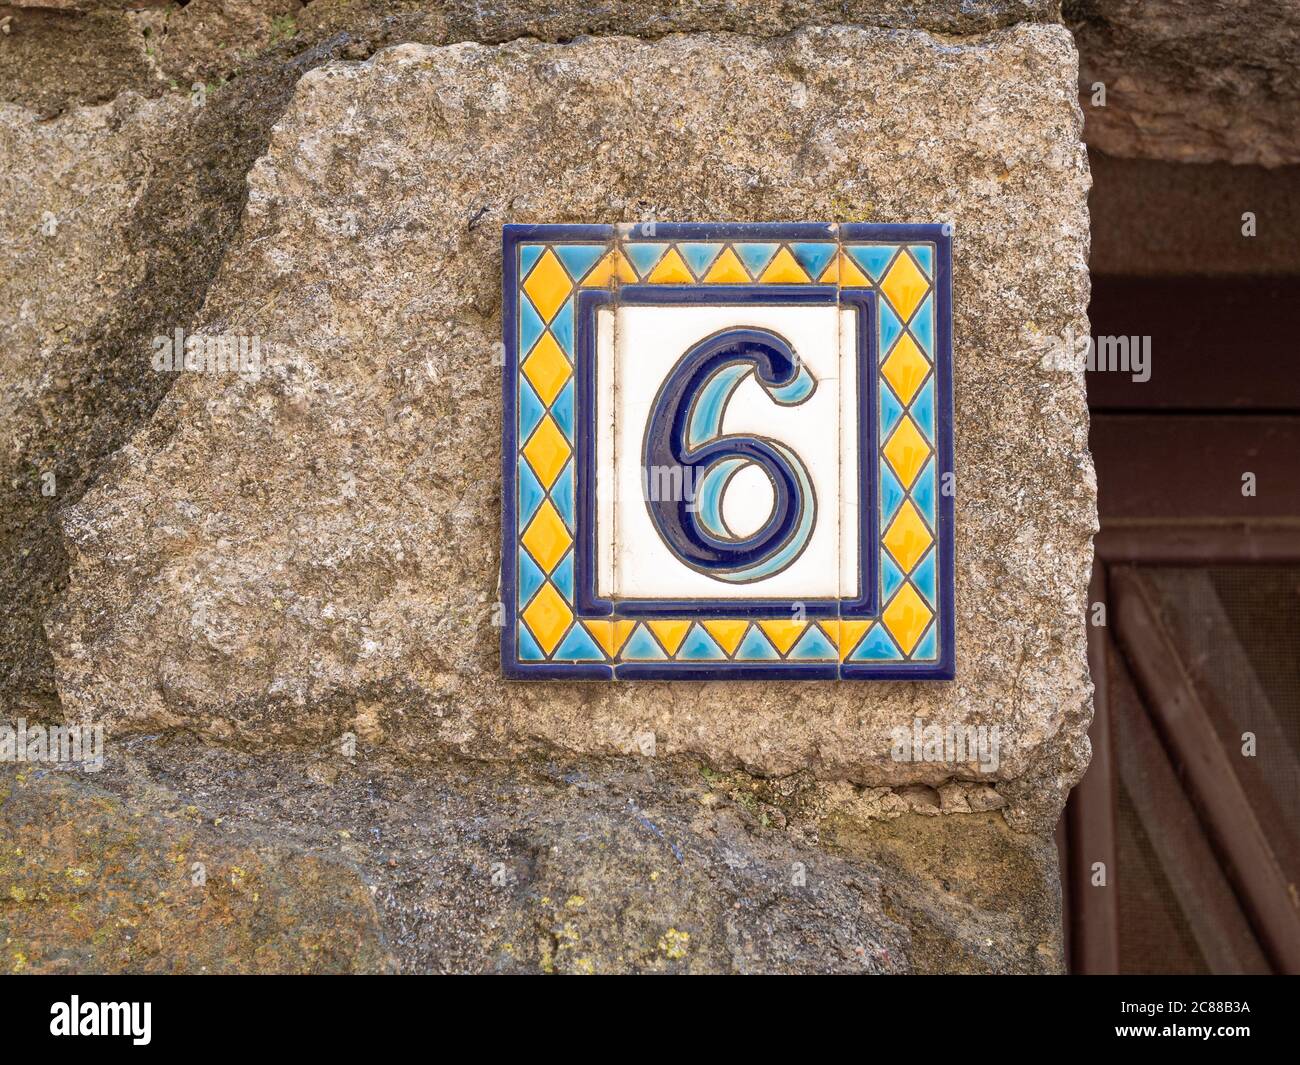 Door sign number 6 tile plate on the wall in the Azulejo style Stock Photo